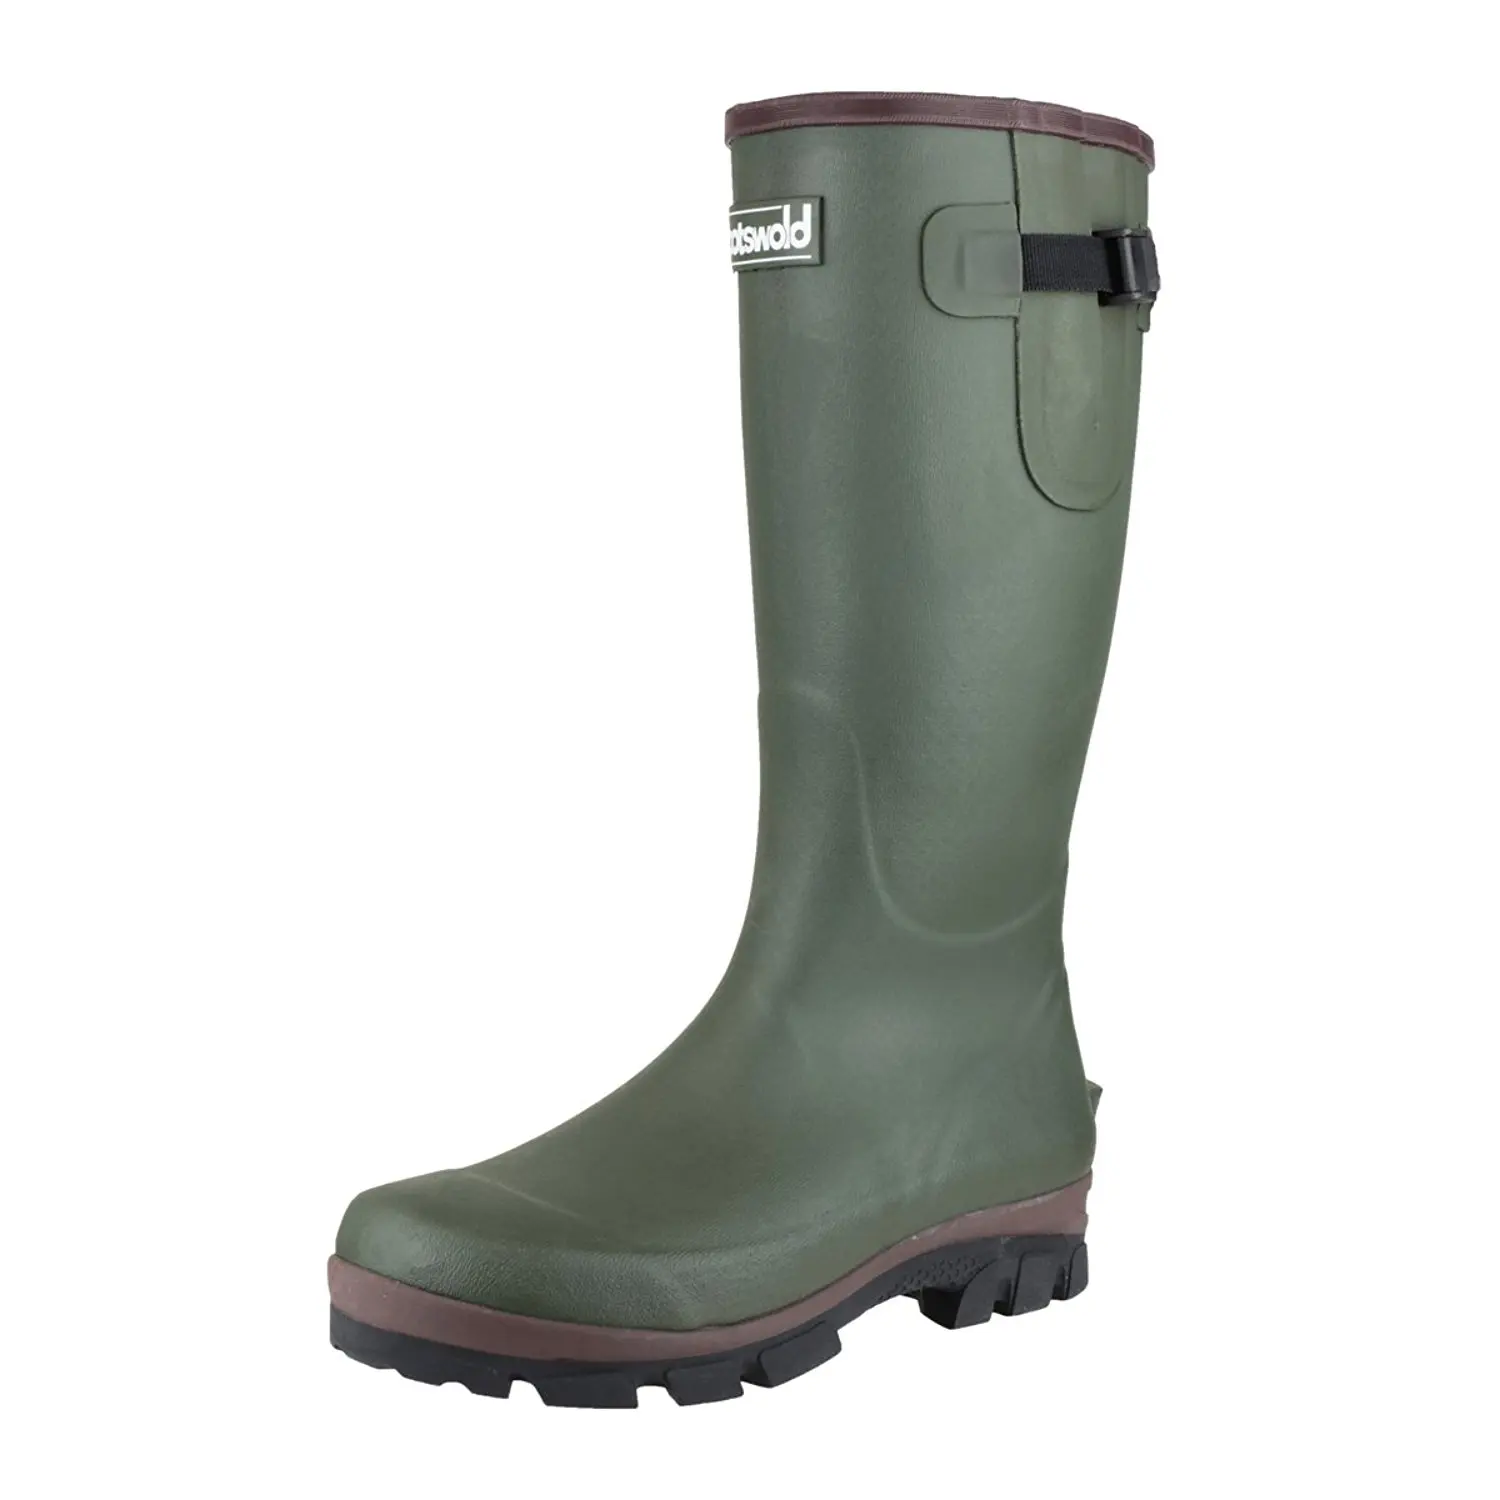 Buy Cotswold Cotswold Mens Ranger Neoprene Expandable Welly Wellington ...